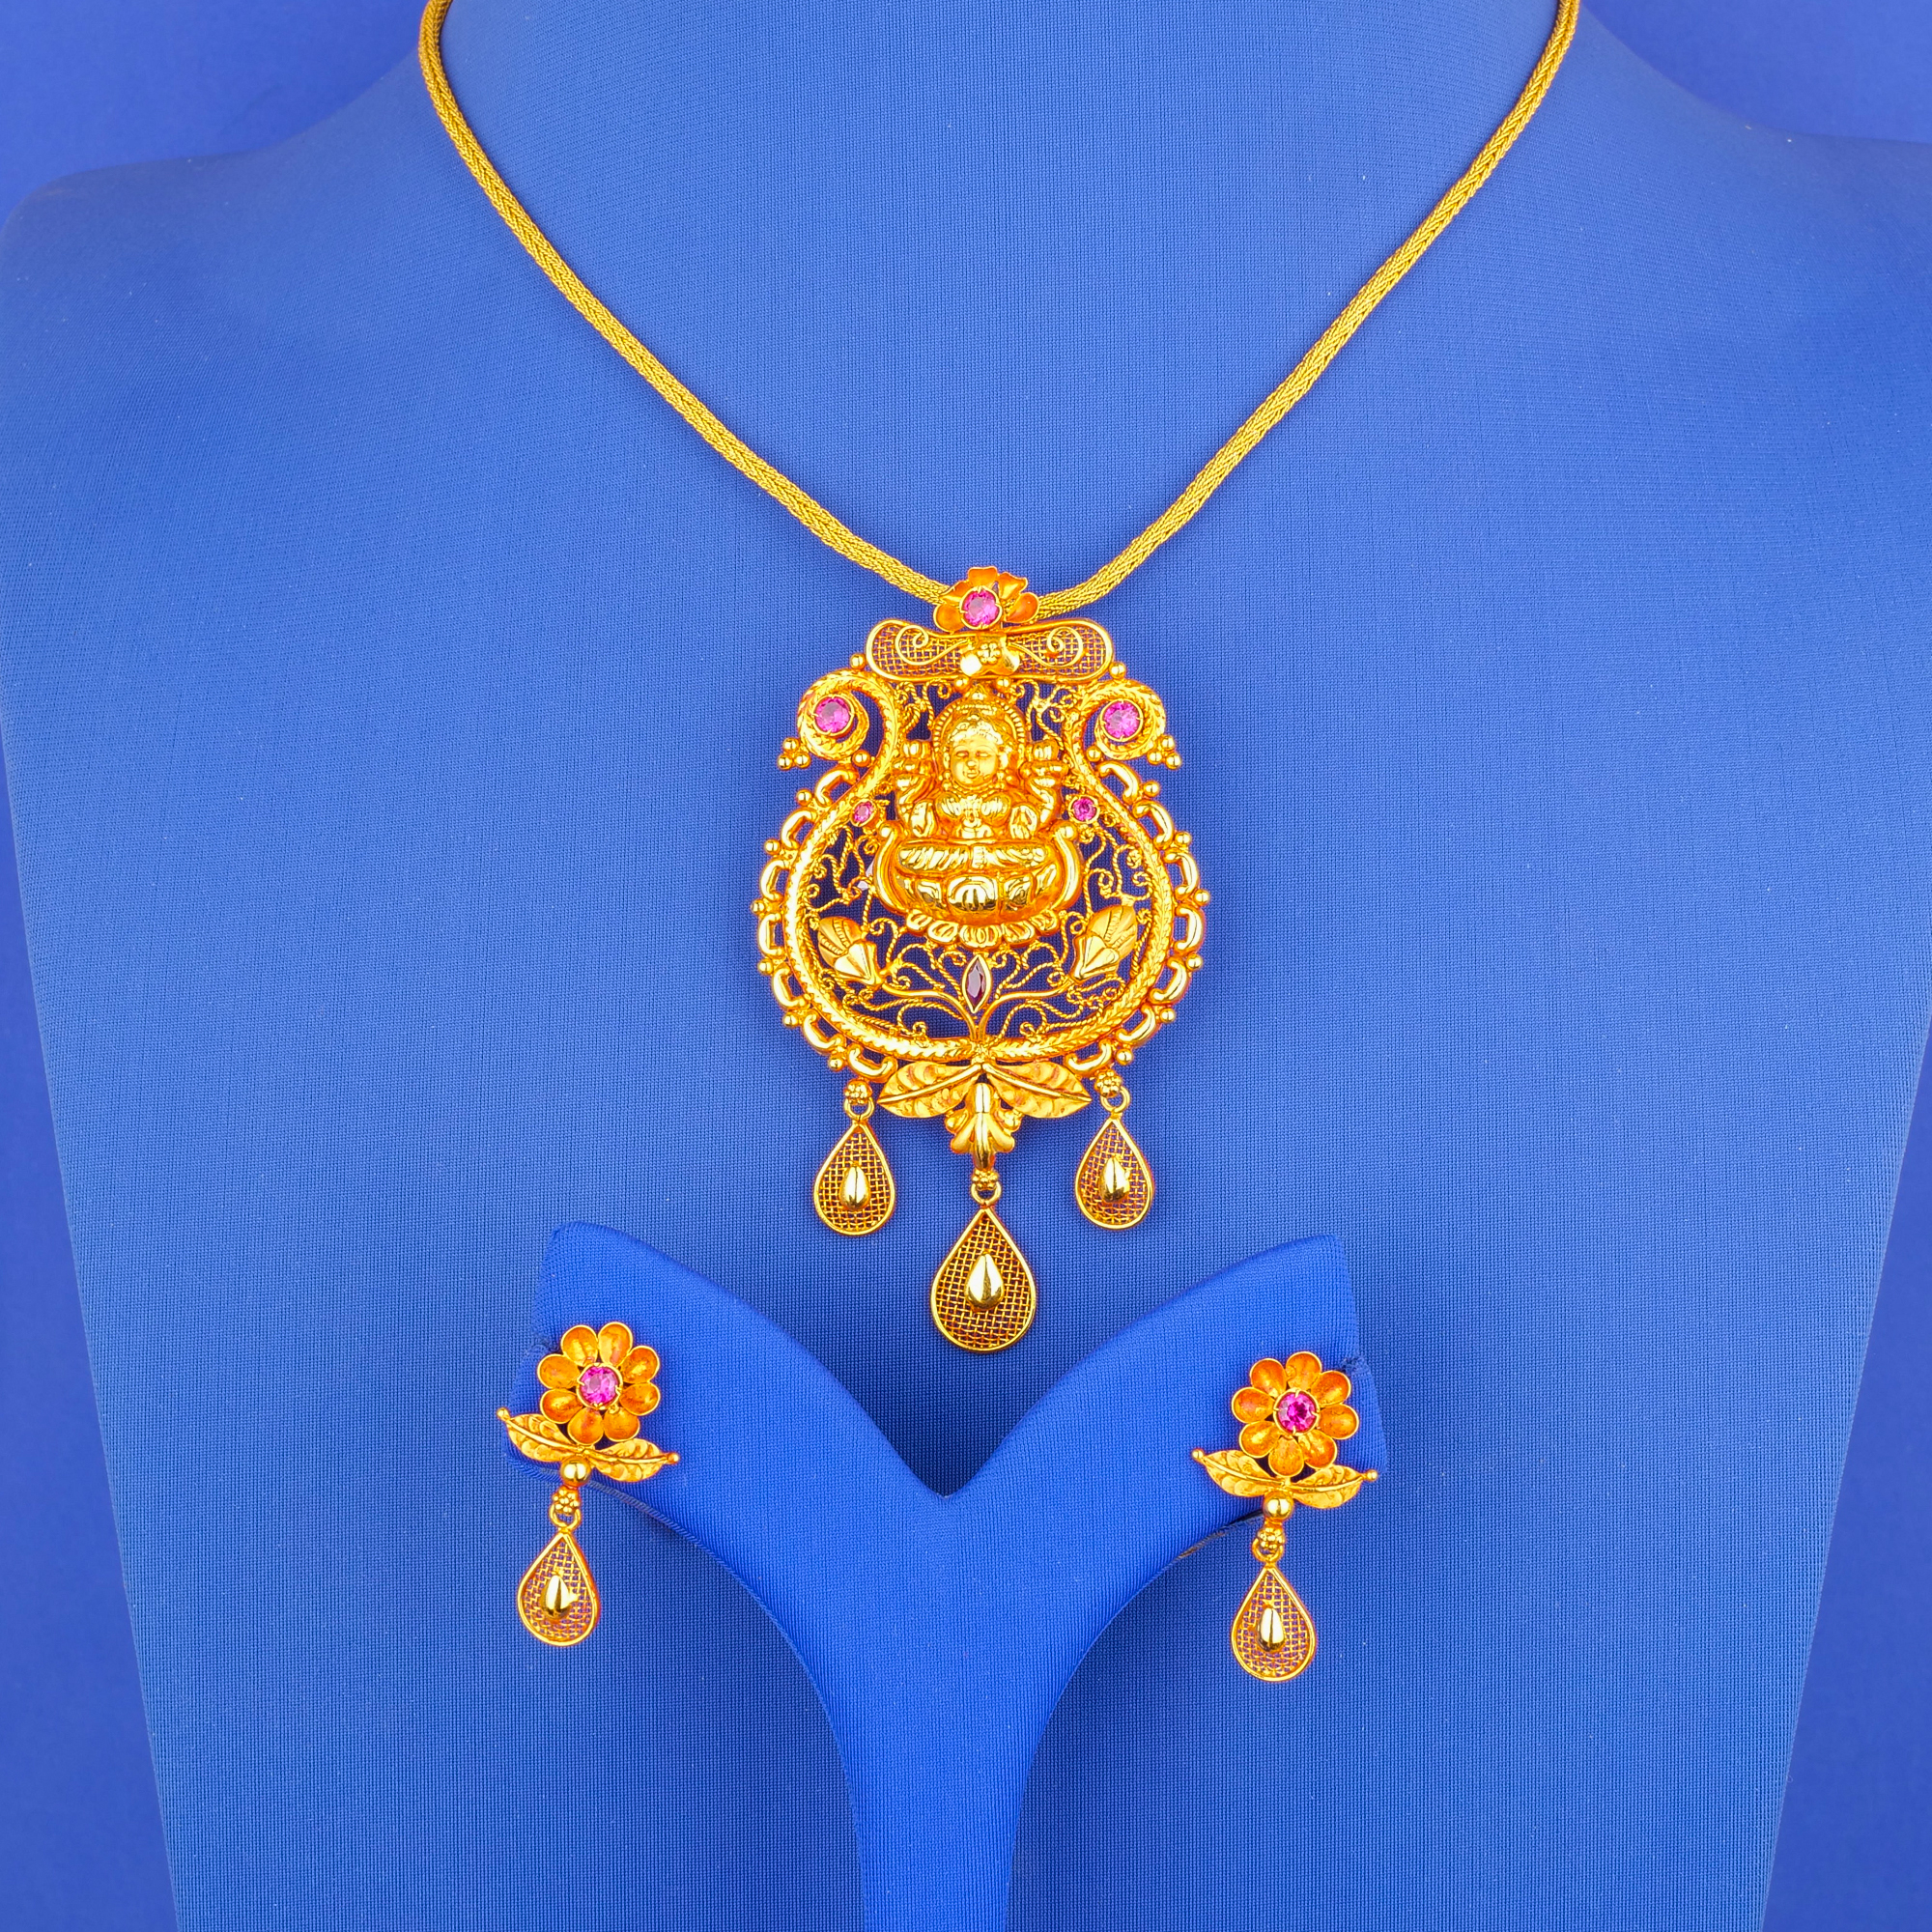 Handmade 22K Gold 'Antique' Pendant and Earrings Set (chain not included)